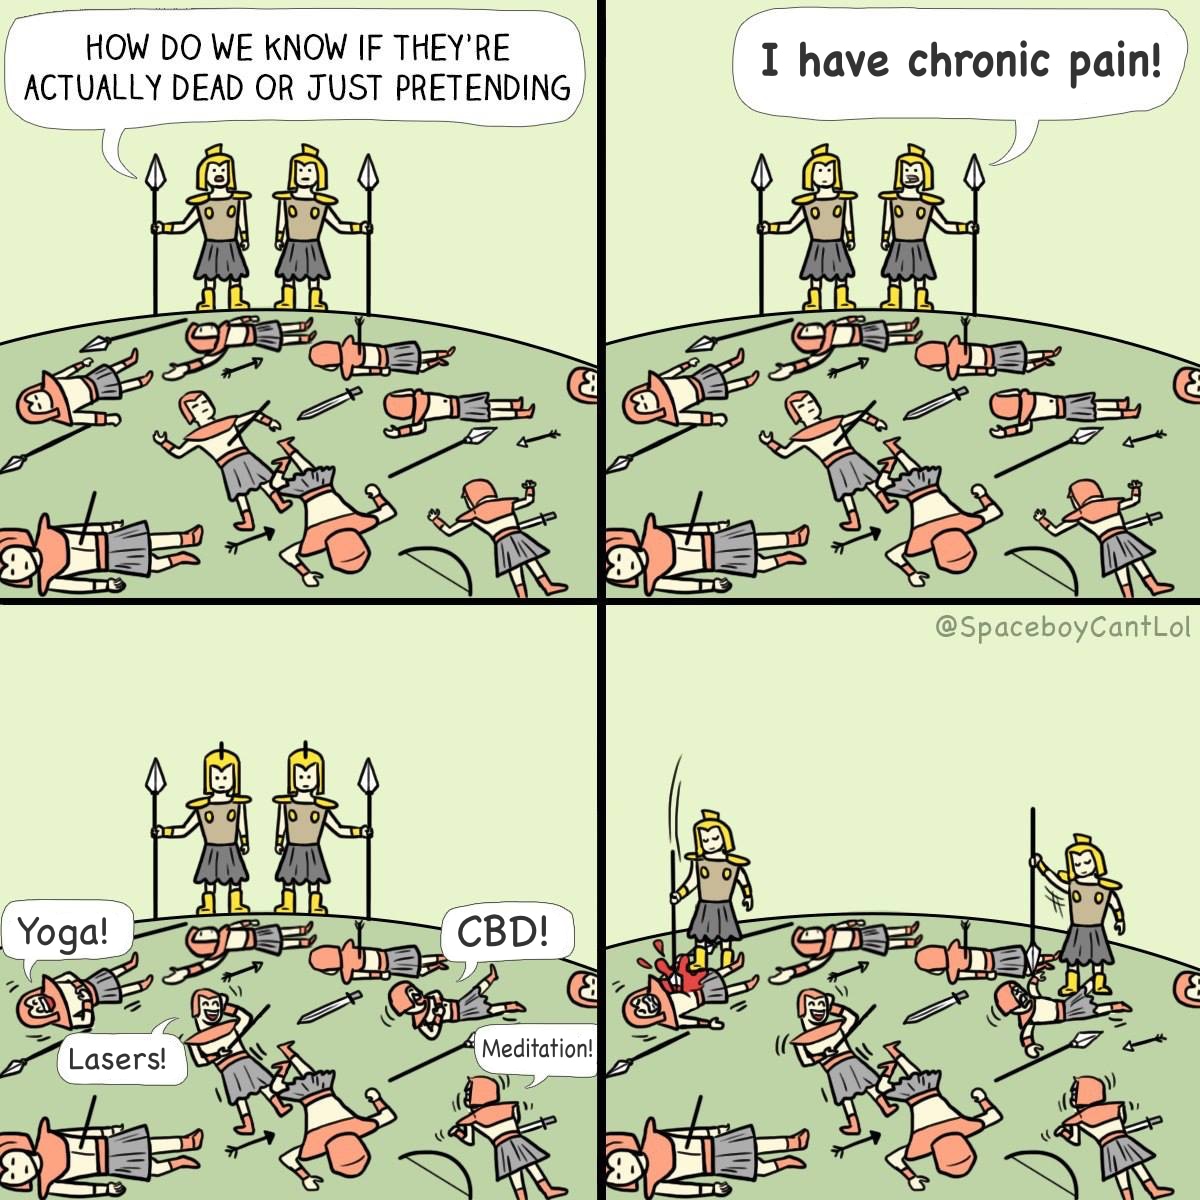 Comic strip, 4 panels, all featuring two ancient soldiers standing up, and several more lying on the ground in front of them, seemingly dead. Panel one: one live soldier asks, “How do we know if they’re actually dead or just pretending?” Second panel, the other soldier shouts: “I have chronic pain!” Third panel: four of the seemingly dead soldiers speak up, saying “Yoga!” “CBD!” “Lasers!” “Meditation!” In the fourth panel, the two live soldiers proceed to finish off the soldiers who revealed themselves as just pretending.